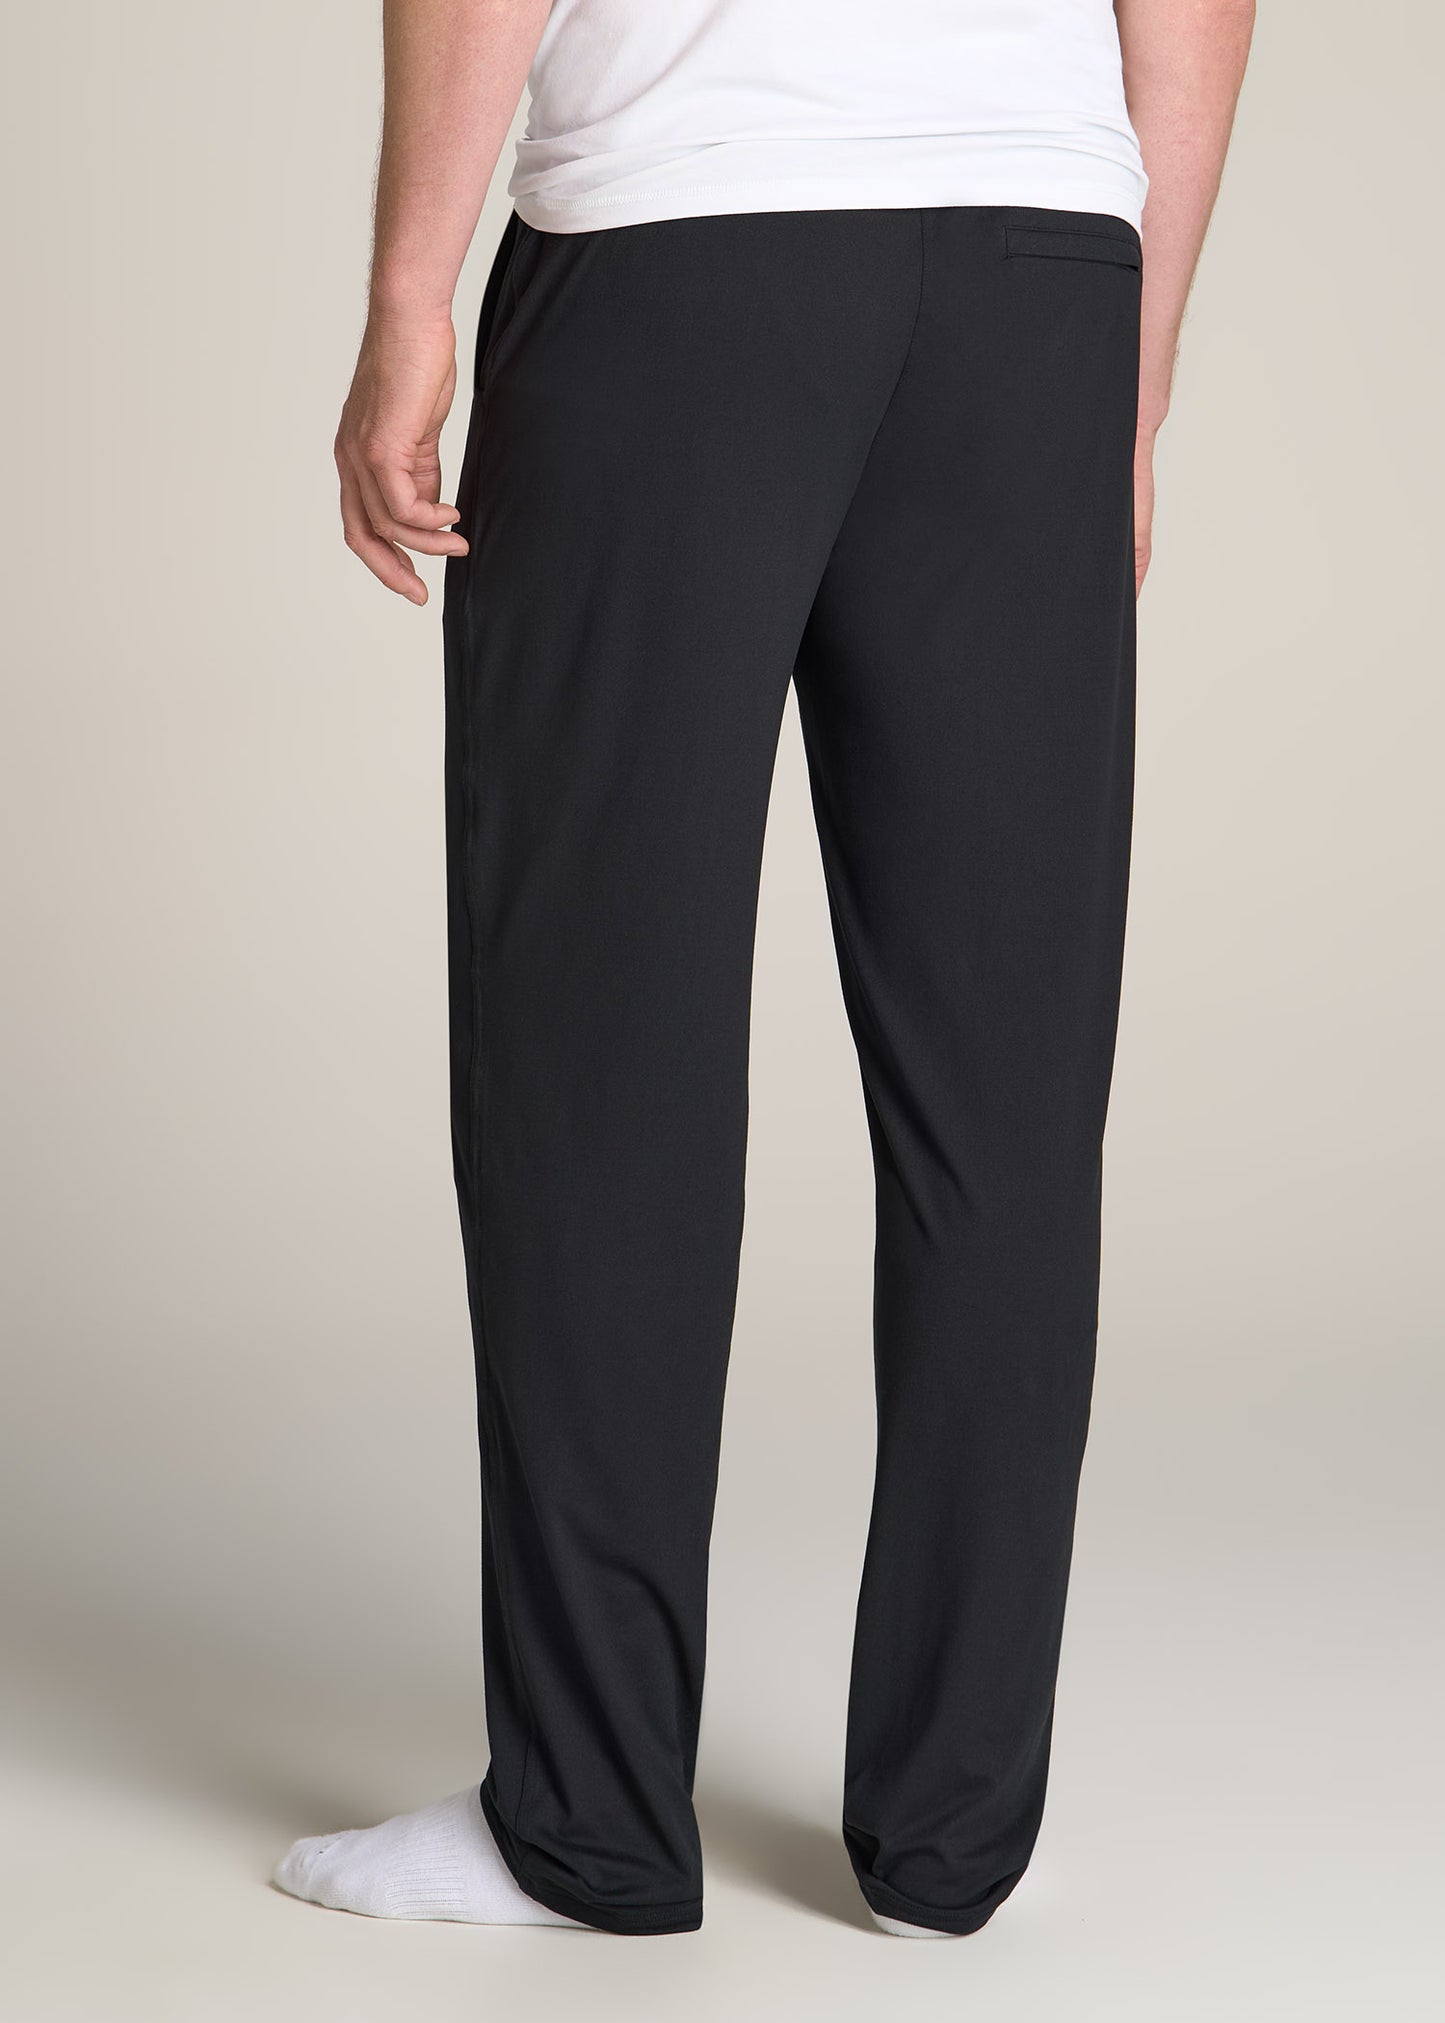 Buy jockey night pant for men in India @ Limeroad | page 2